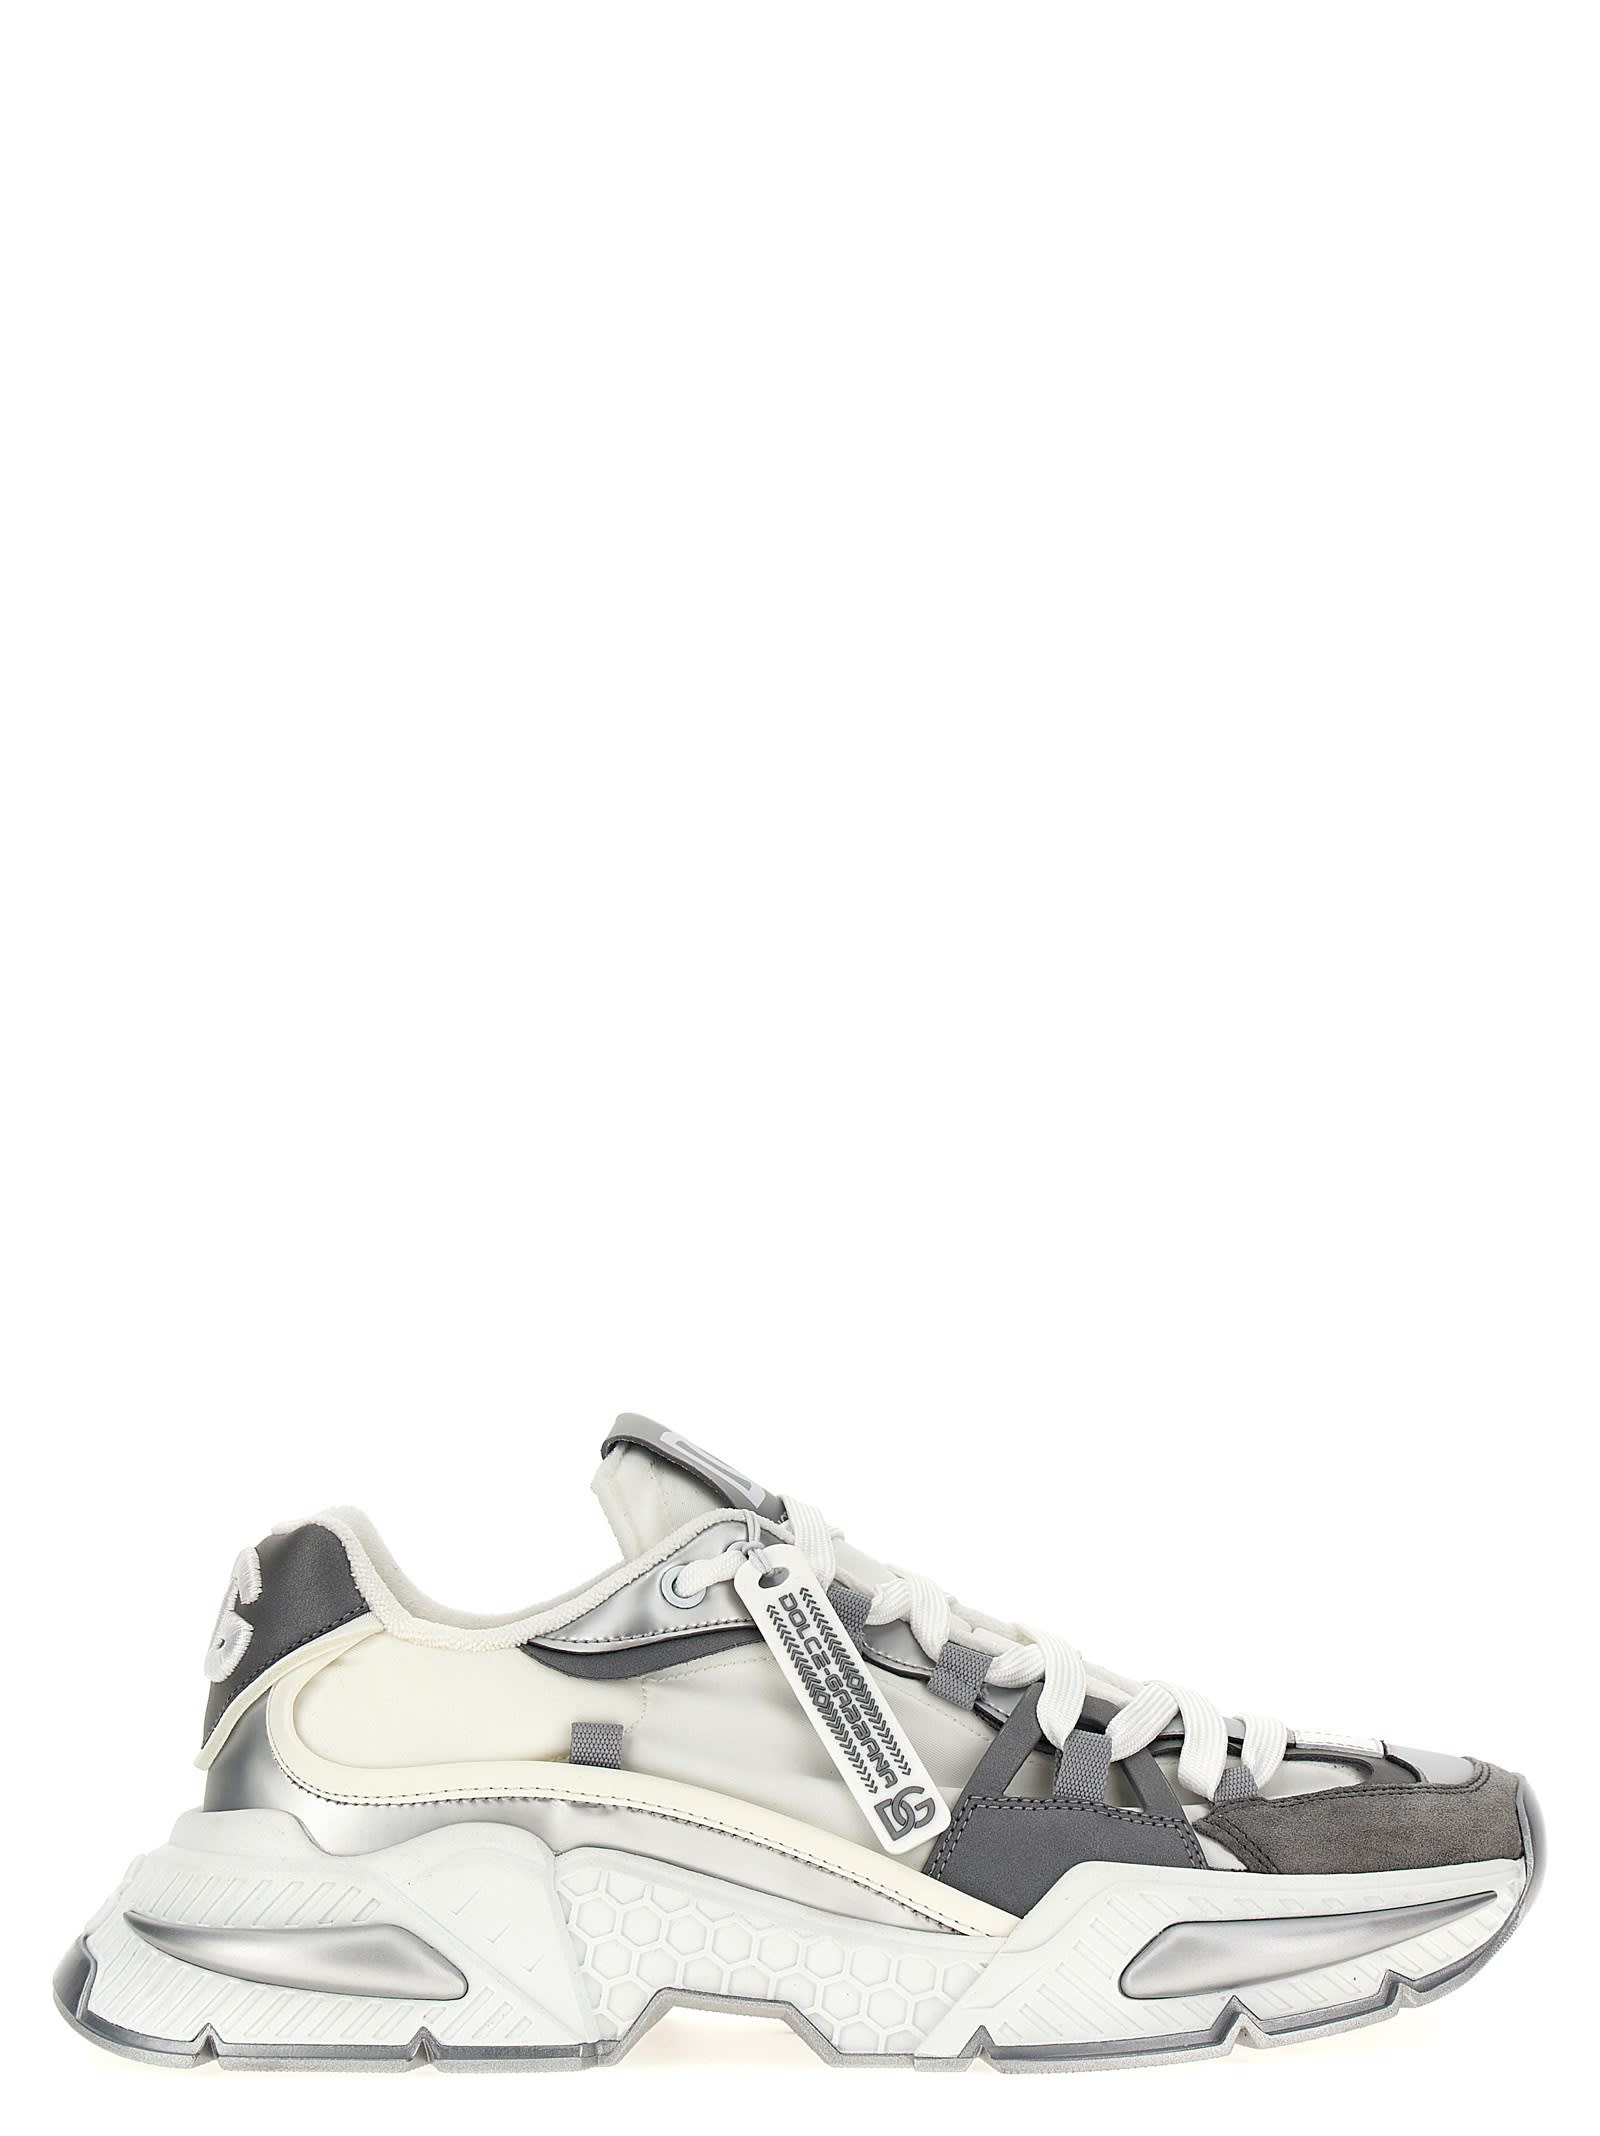 Shop Dolce & Gabbana Airmaster Sneakers In Multicolor